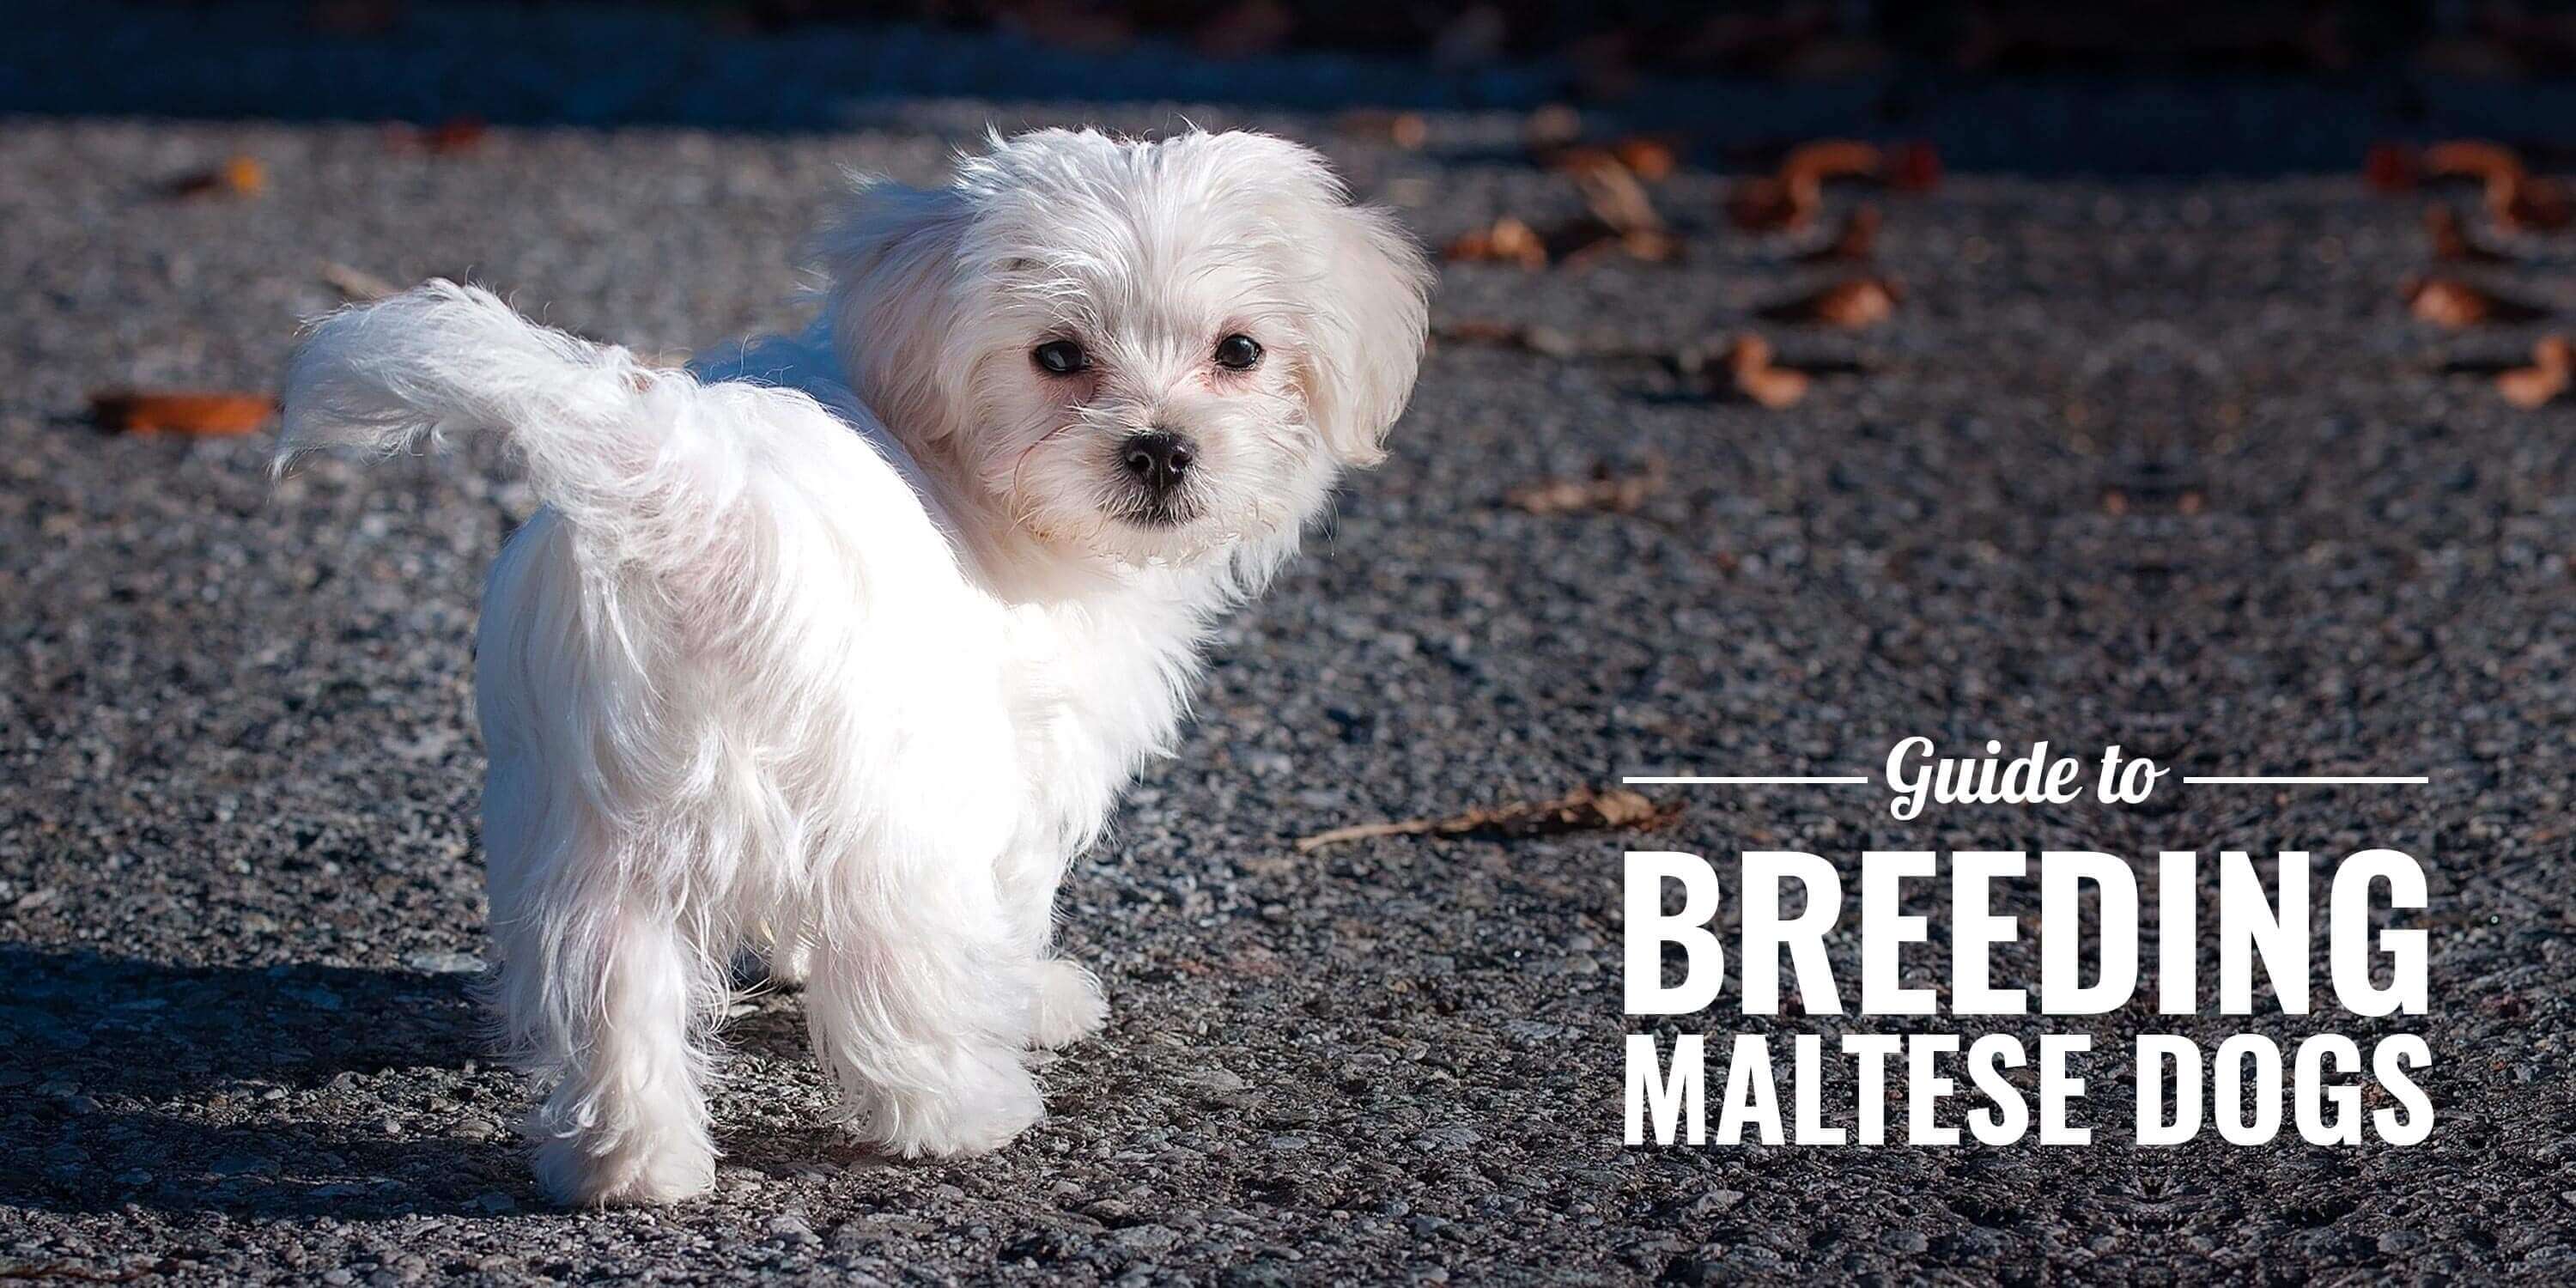 How To Breed Maltese Dogs